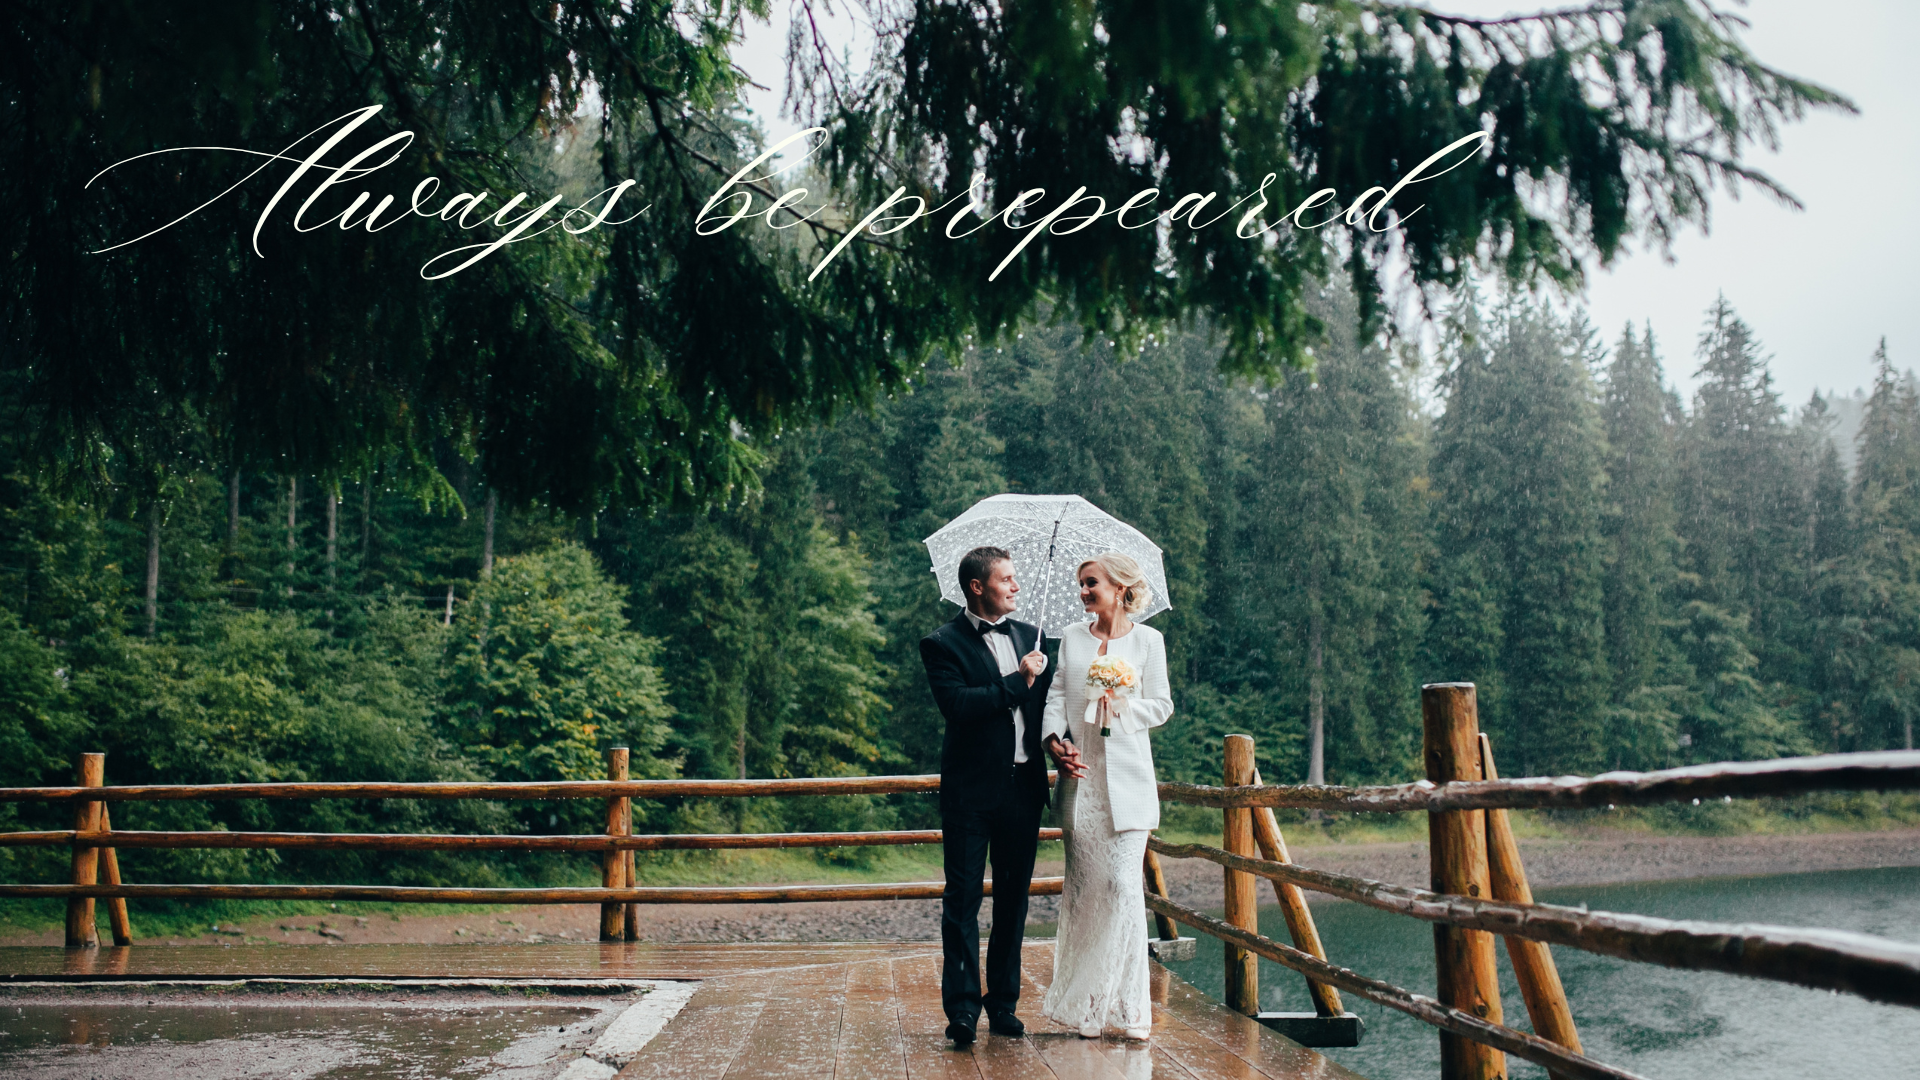 Always be prepared for a rainy day when planning a wedding | How to prepare for rain on your wedding day